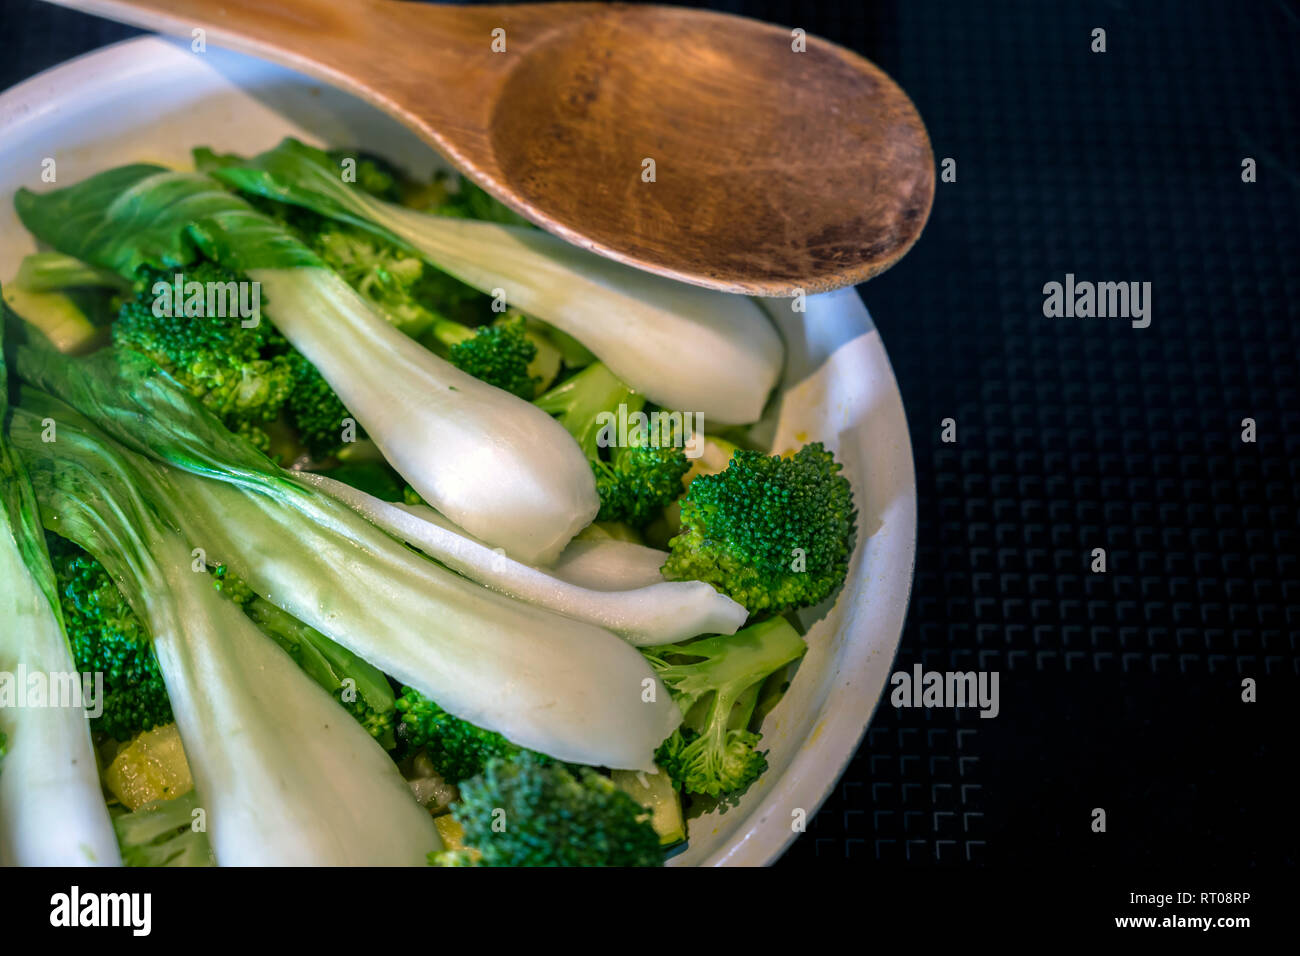 Long-leafed Cabbage with onion and broccoli stew in frying pan on an electric stove - dietary low-calorie natural organic dish that is good for your h Stock Photo